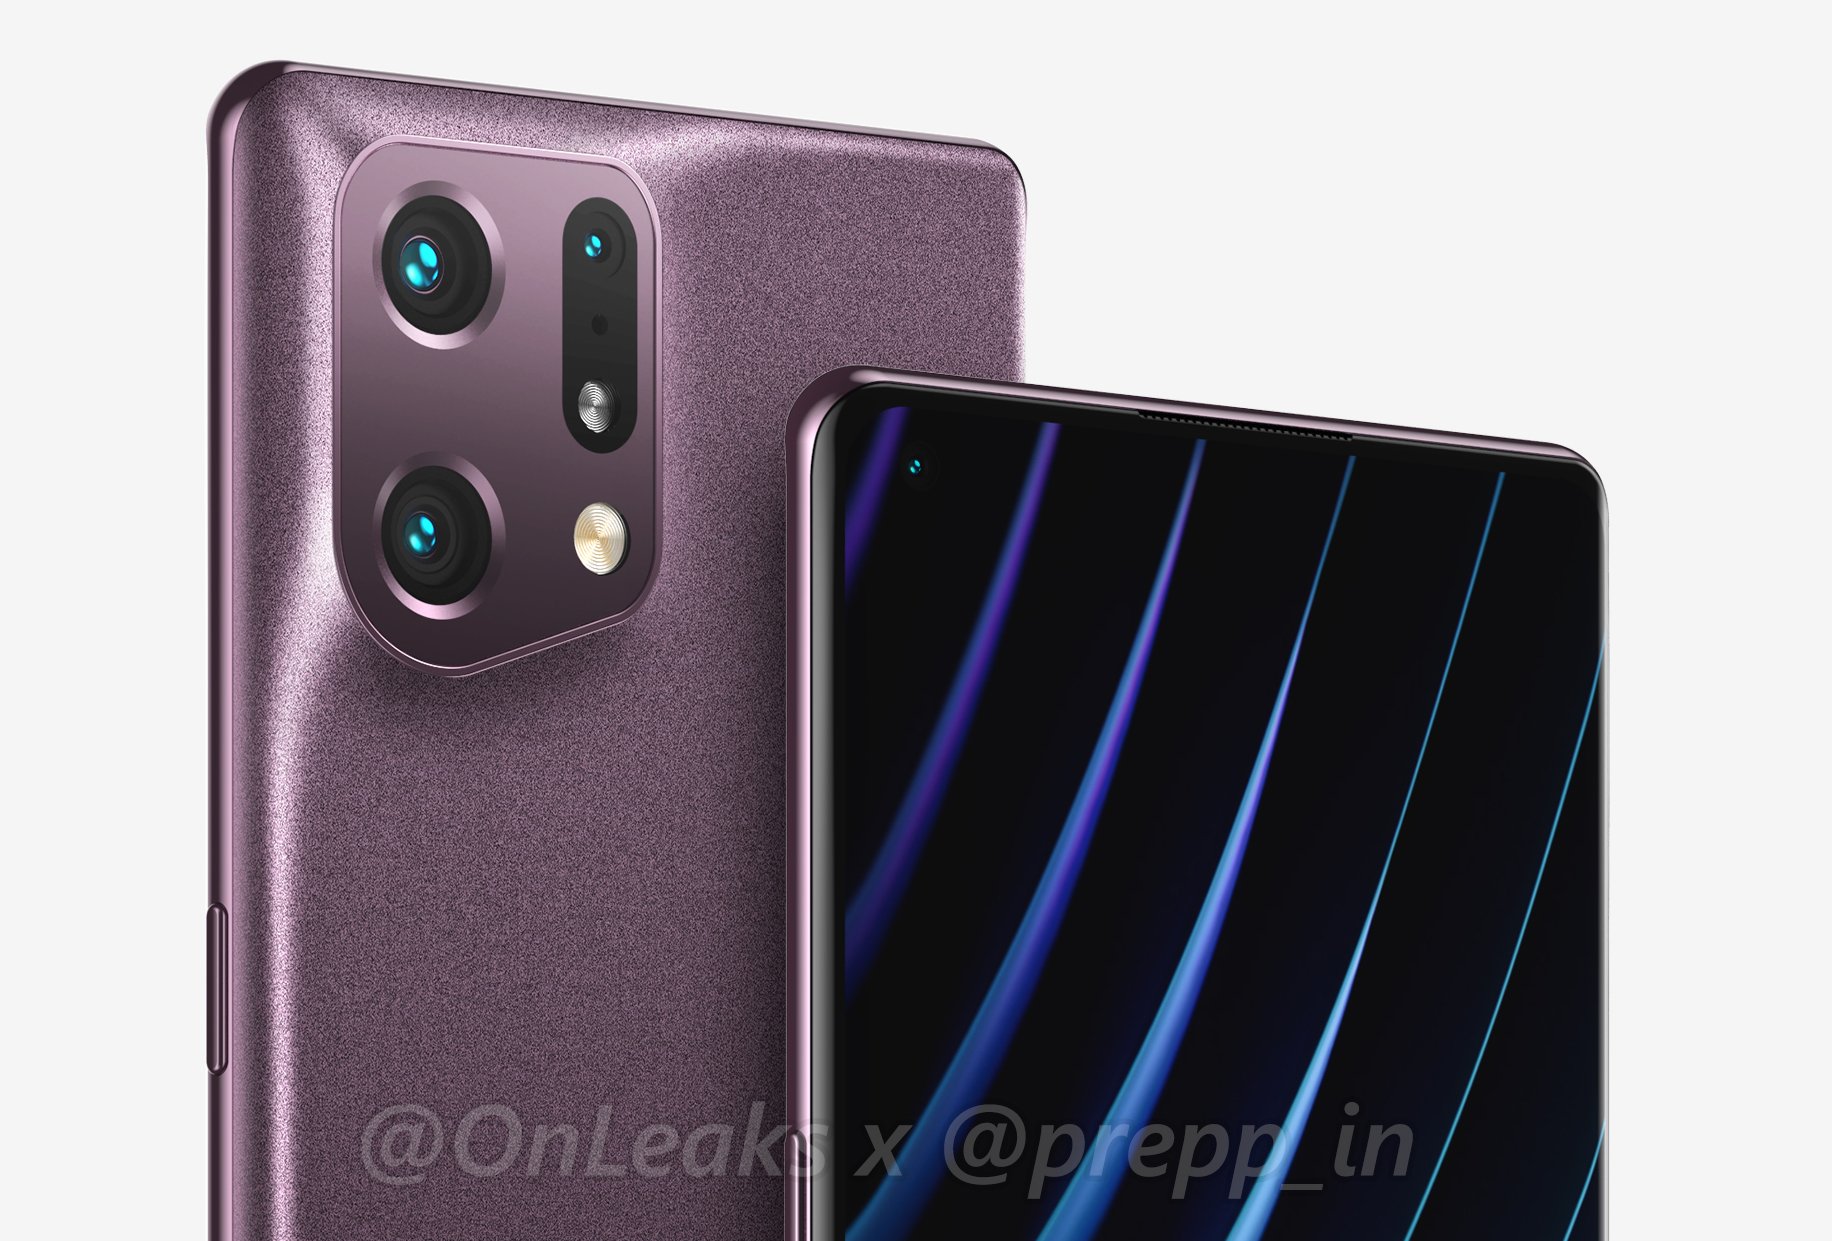 Oppo Find X3 Pro flagship phone launch date leaked